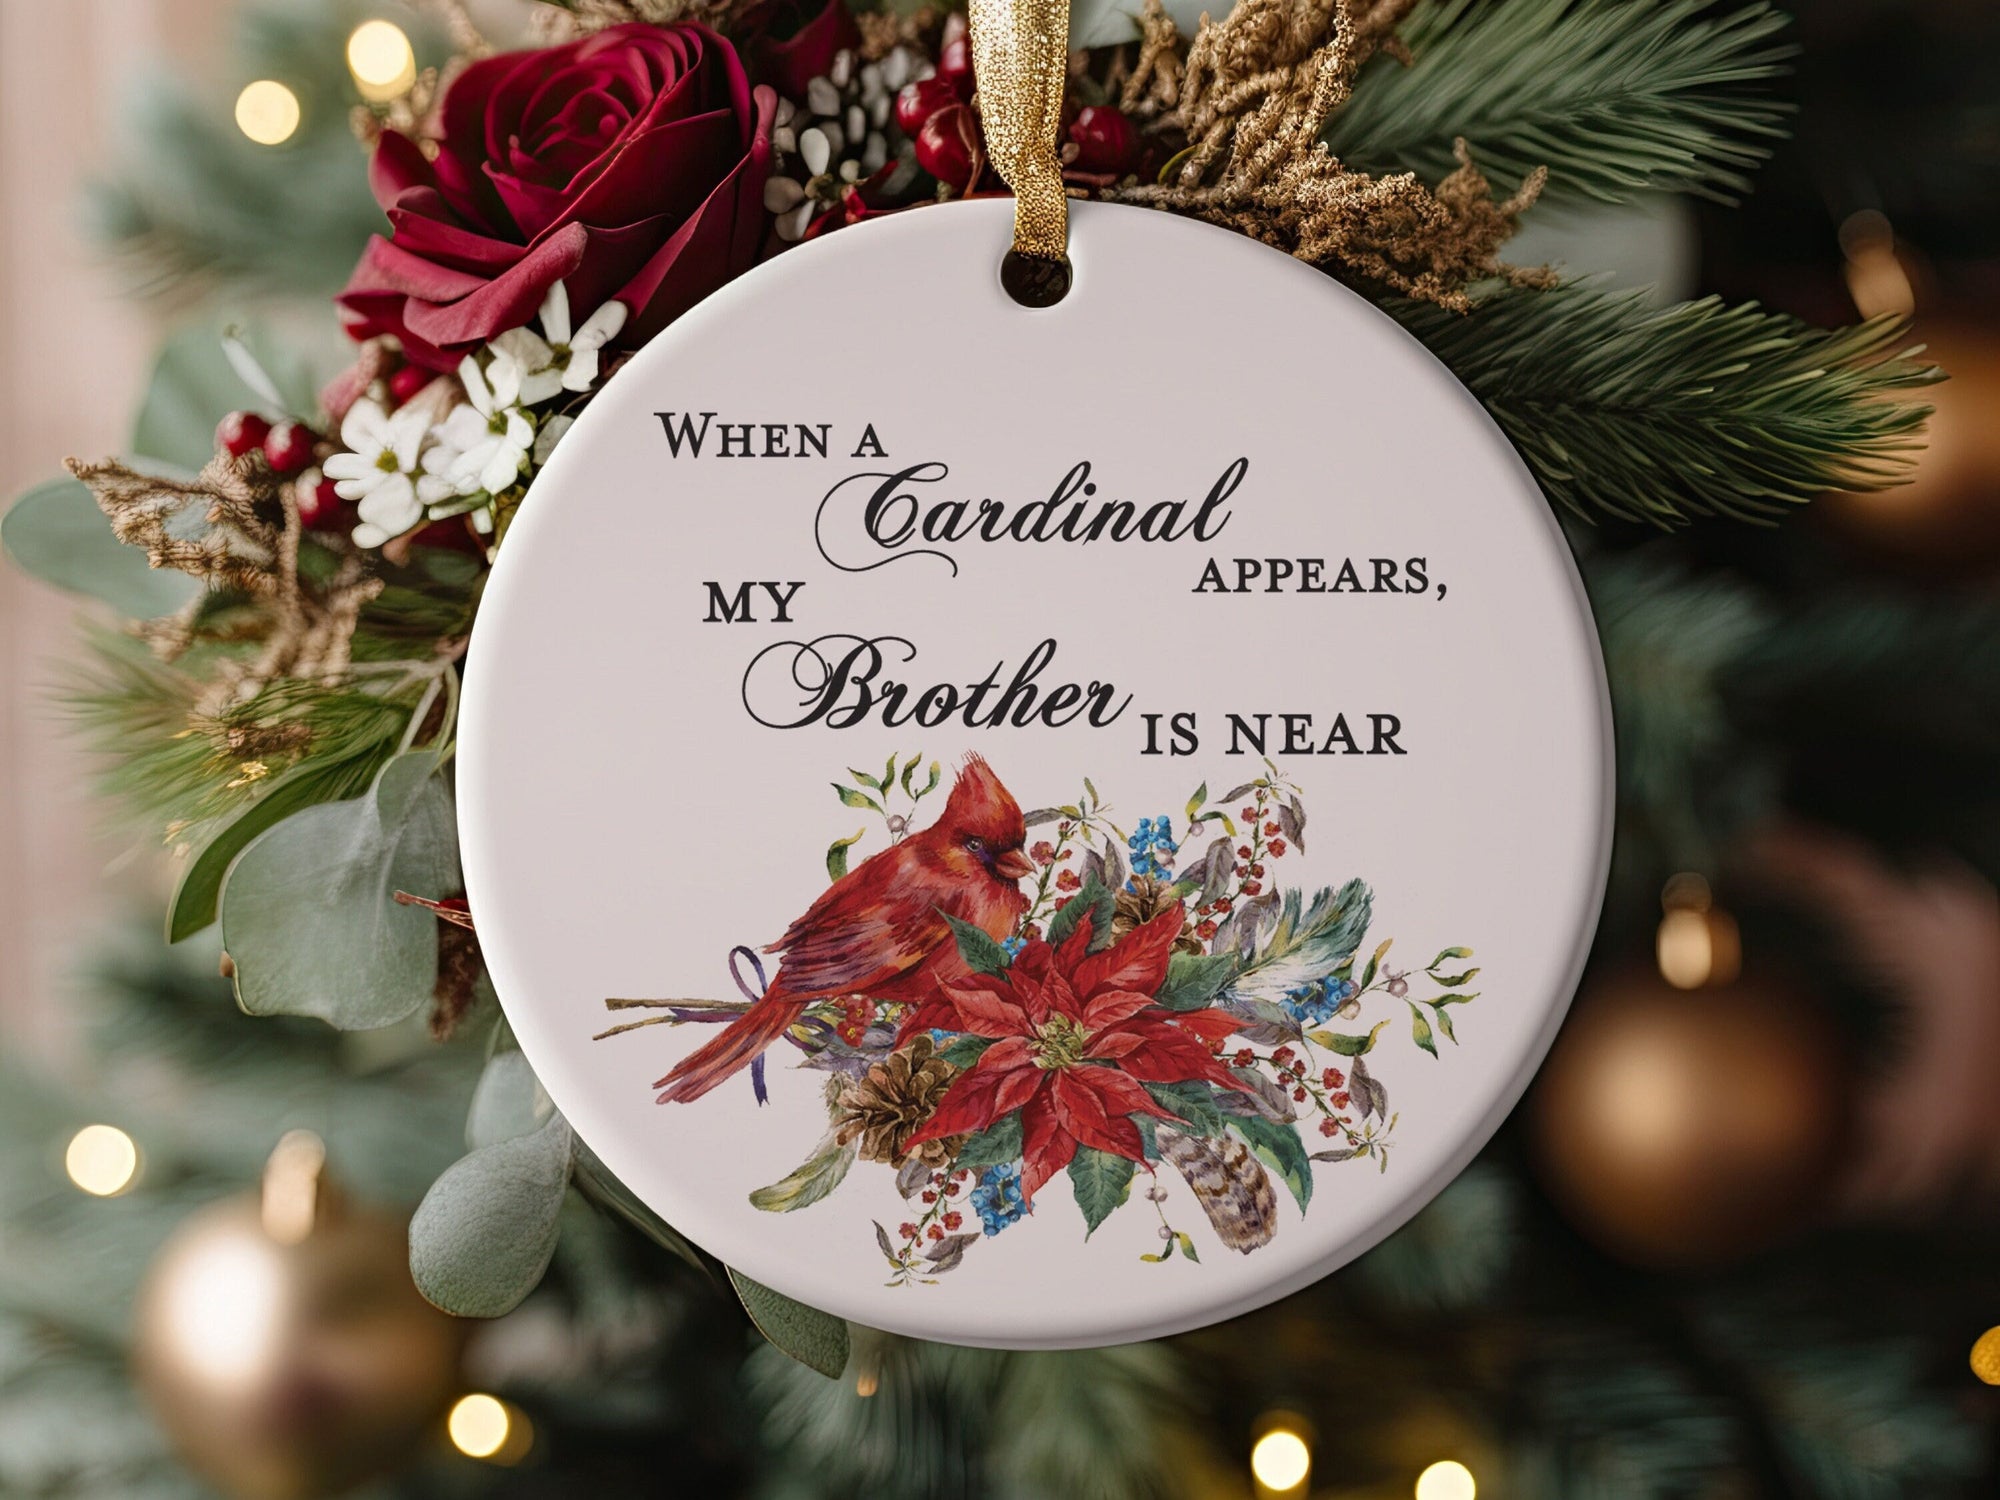 When a Cardinal Appears, My Brother is Near Christmas Memorial Gift, Sympathy or Bereavement Present, Sibling Loss Present, Love My Brother